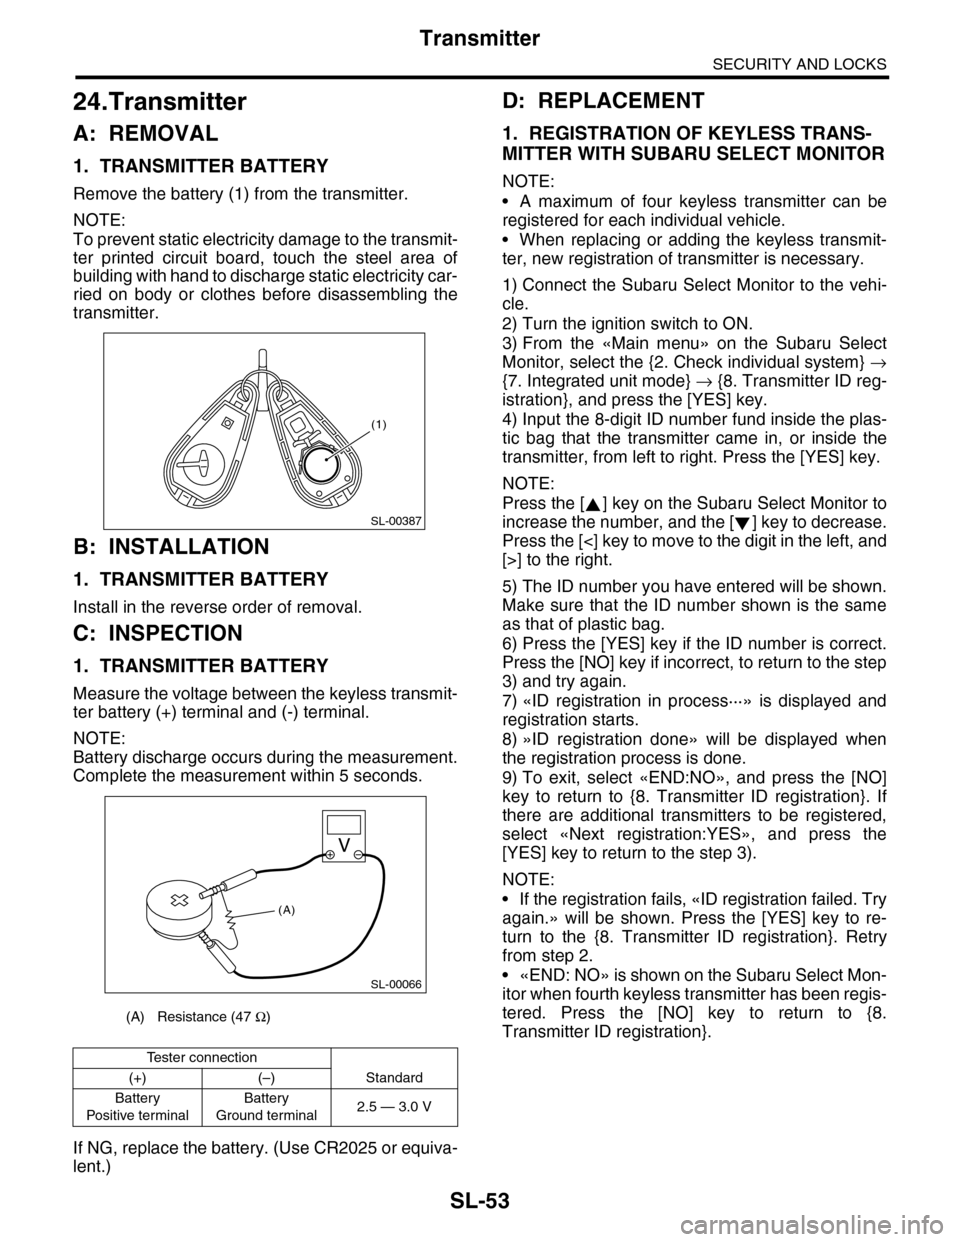 SUBARU TRIBECA 2009 1.G Service Workshop Manual SL-53
Transmitter
SECURITY AND LOCKS
24.Transmitter
A: REMOVAL
1. TRANSMITTER BATTERY
Remove the battery (1) from the transmitter.
NOTE:
To prevent static electricity damage to the transmit-
ter  prin